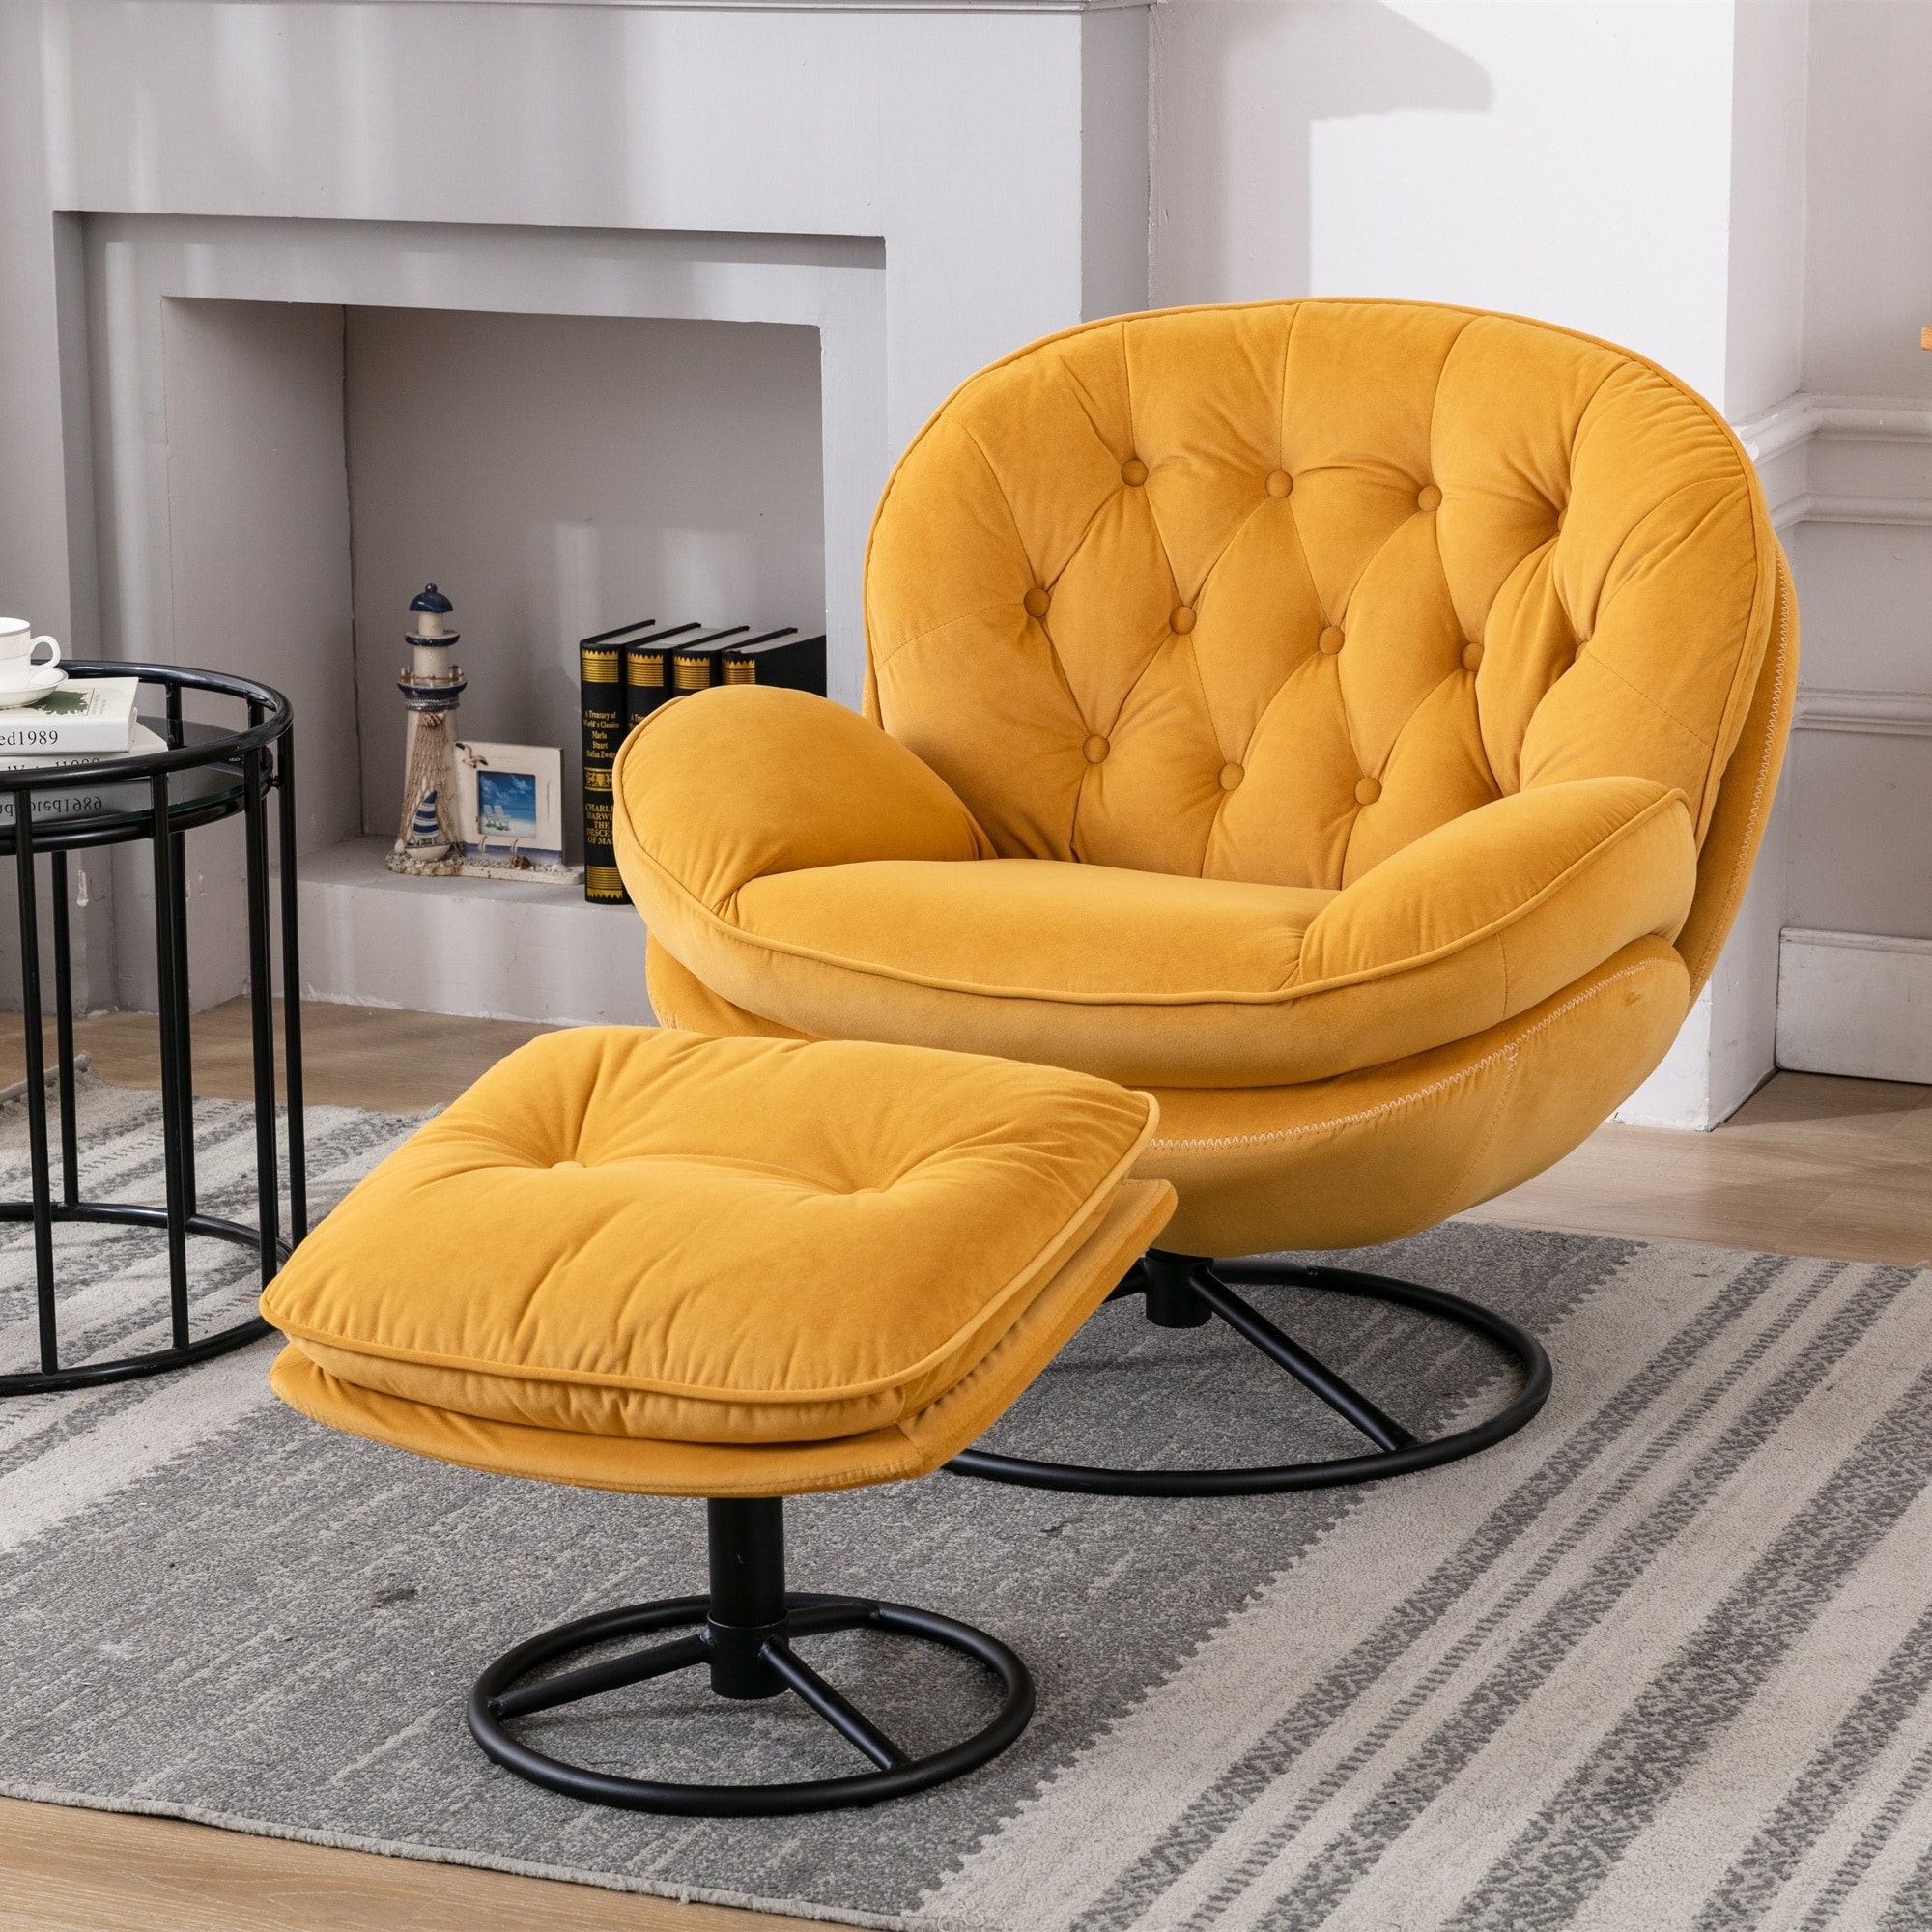 Velvet Upholstered Accent Chair TV Chair Living Room Swivel Leisure Chair with Chair & Ottoman Sets and Metal Frame